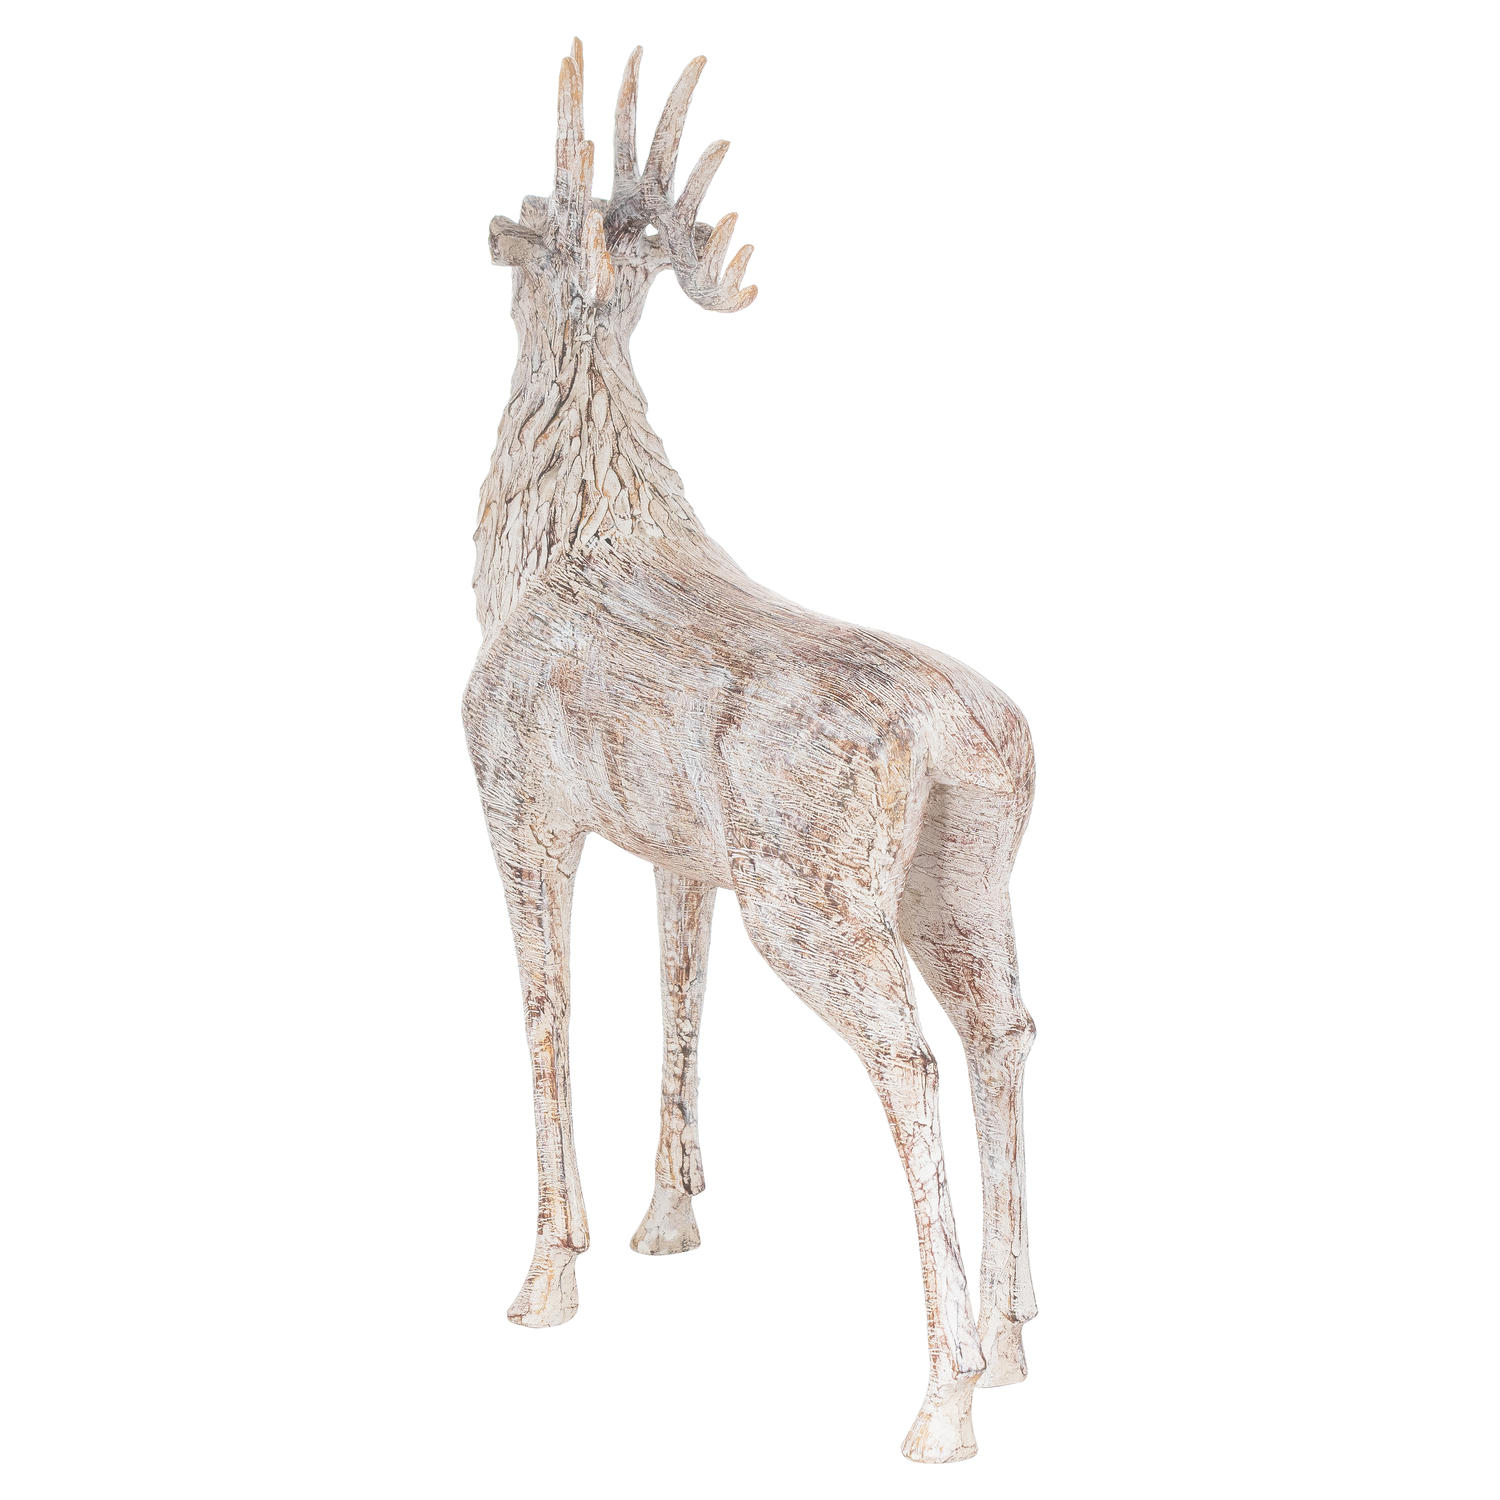 Carved Wood Effect Stag - Image 3